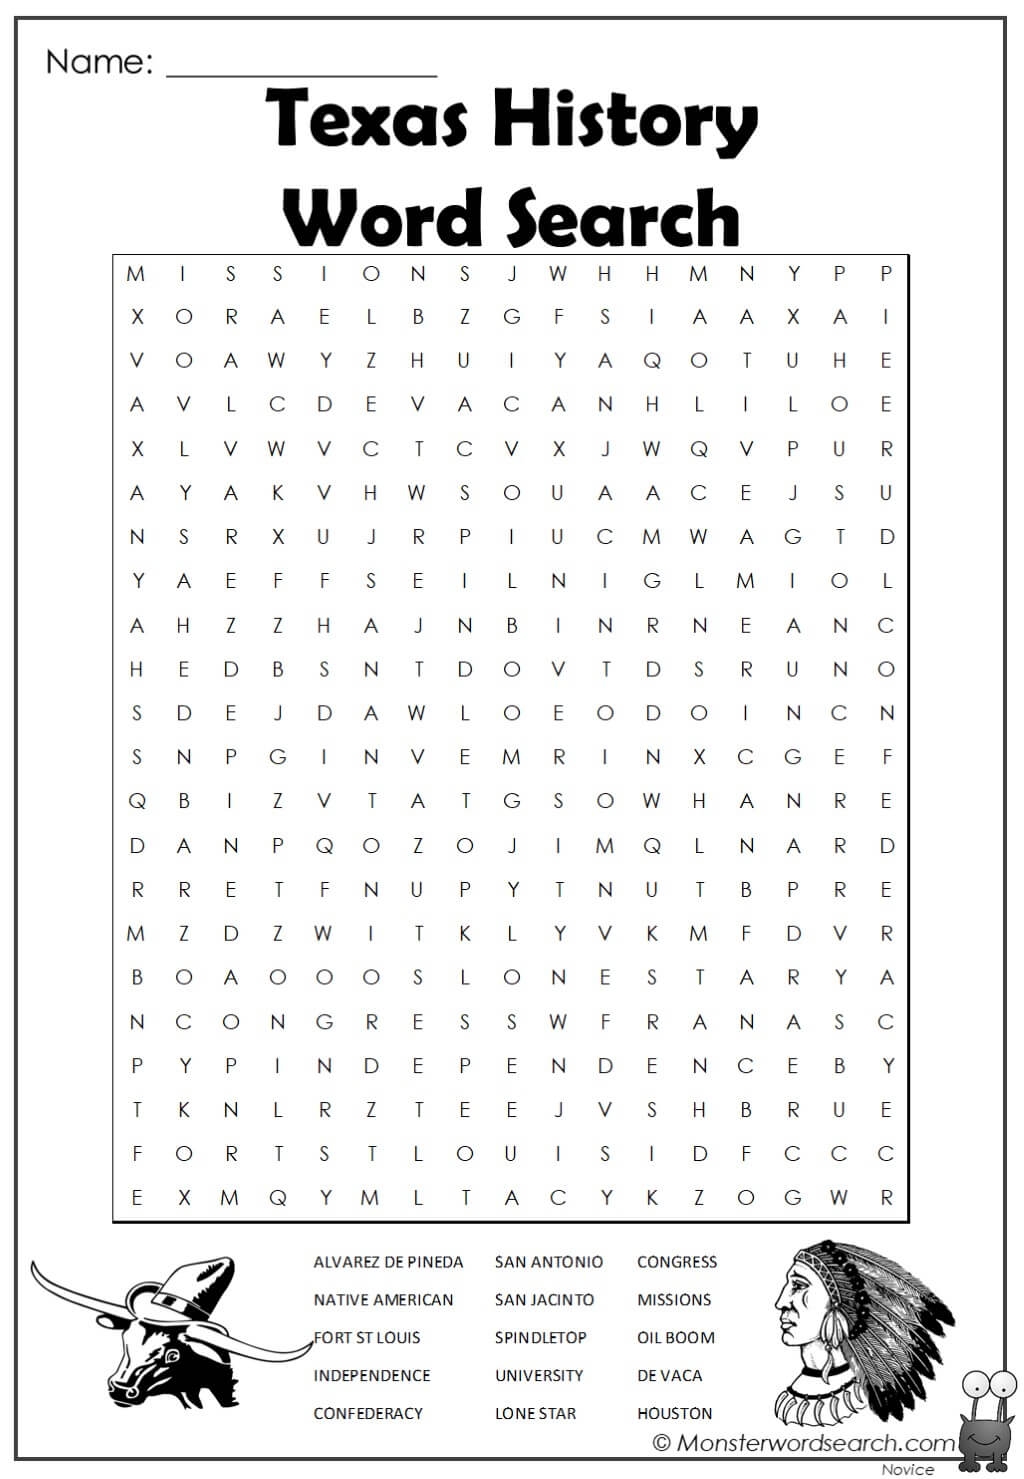 Texas History Word Search Monster Word Search